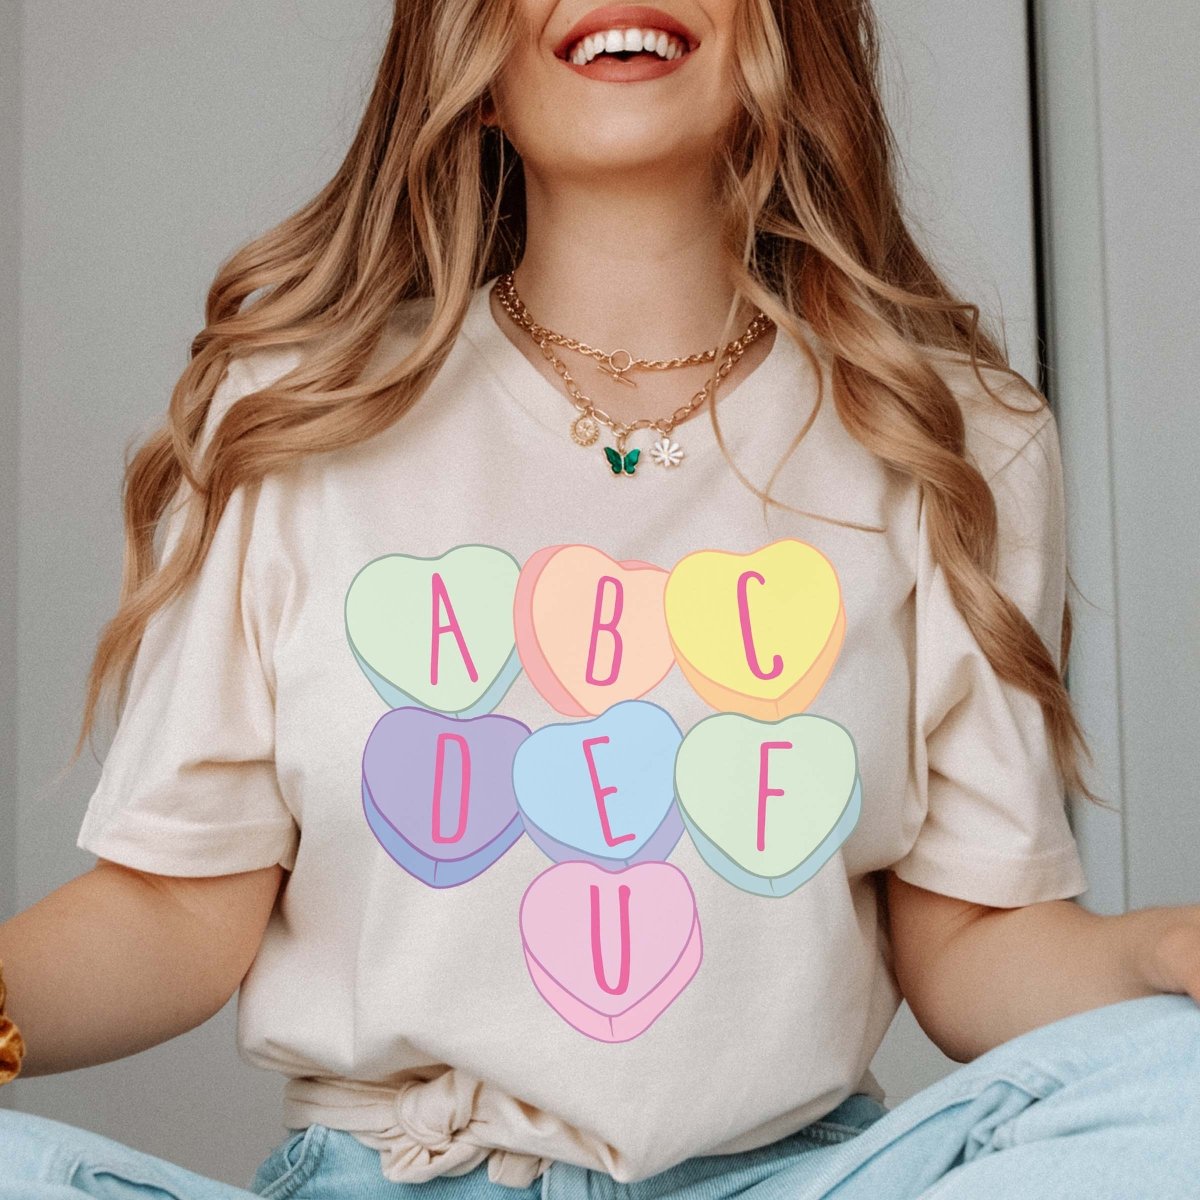 ABCDEFU Hearts Wholesale Tee - Limeberry Designs